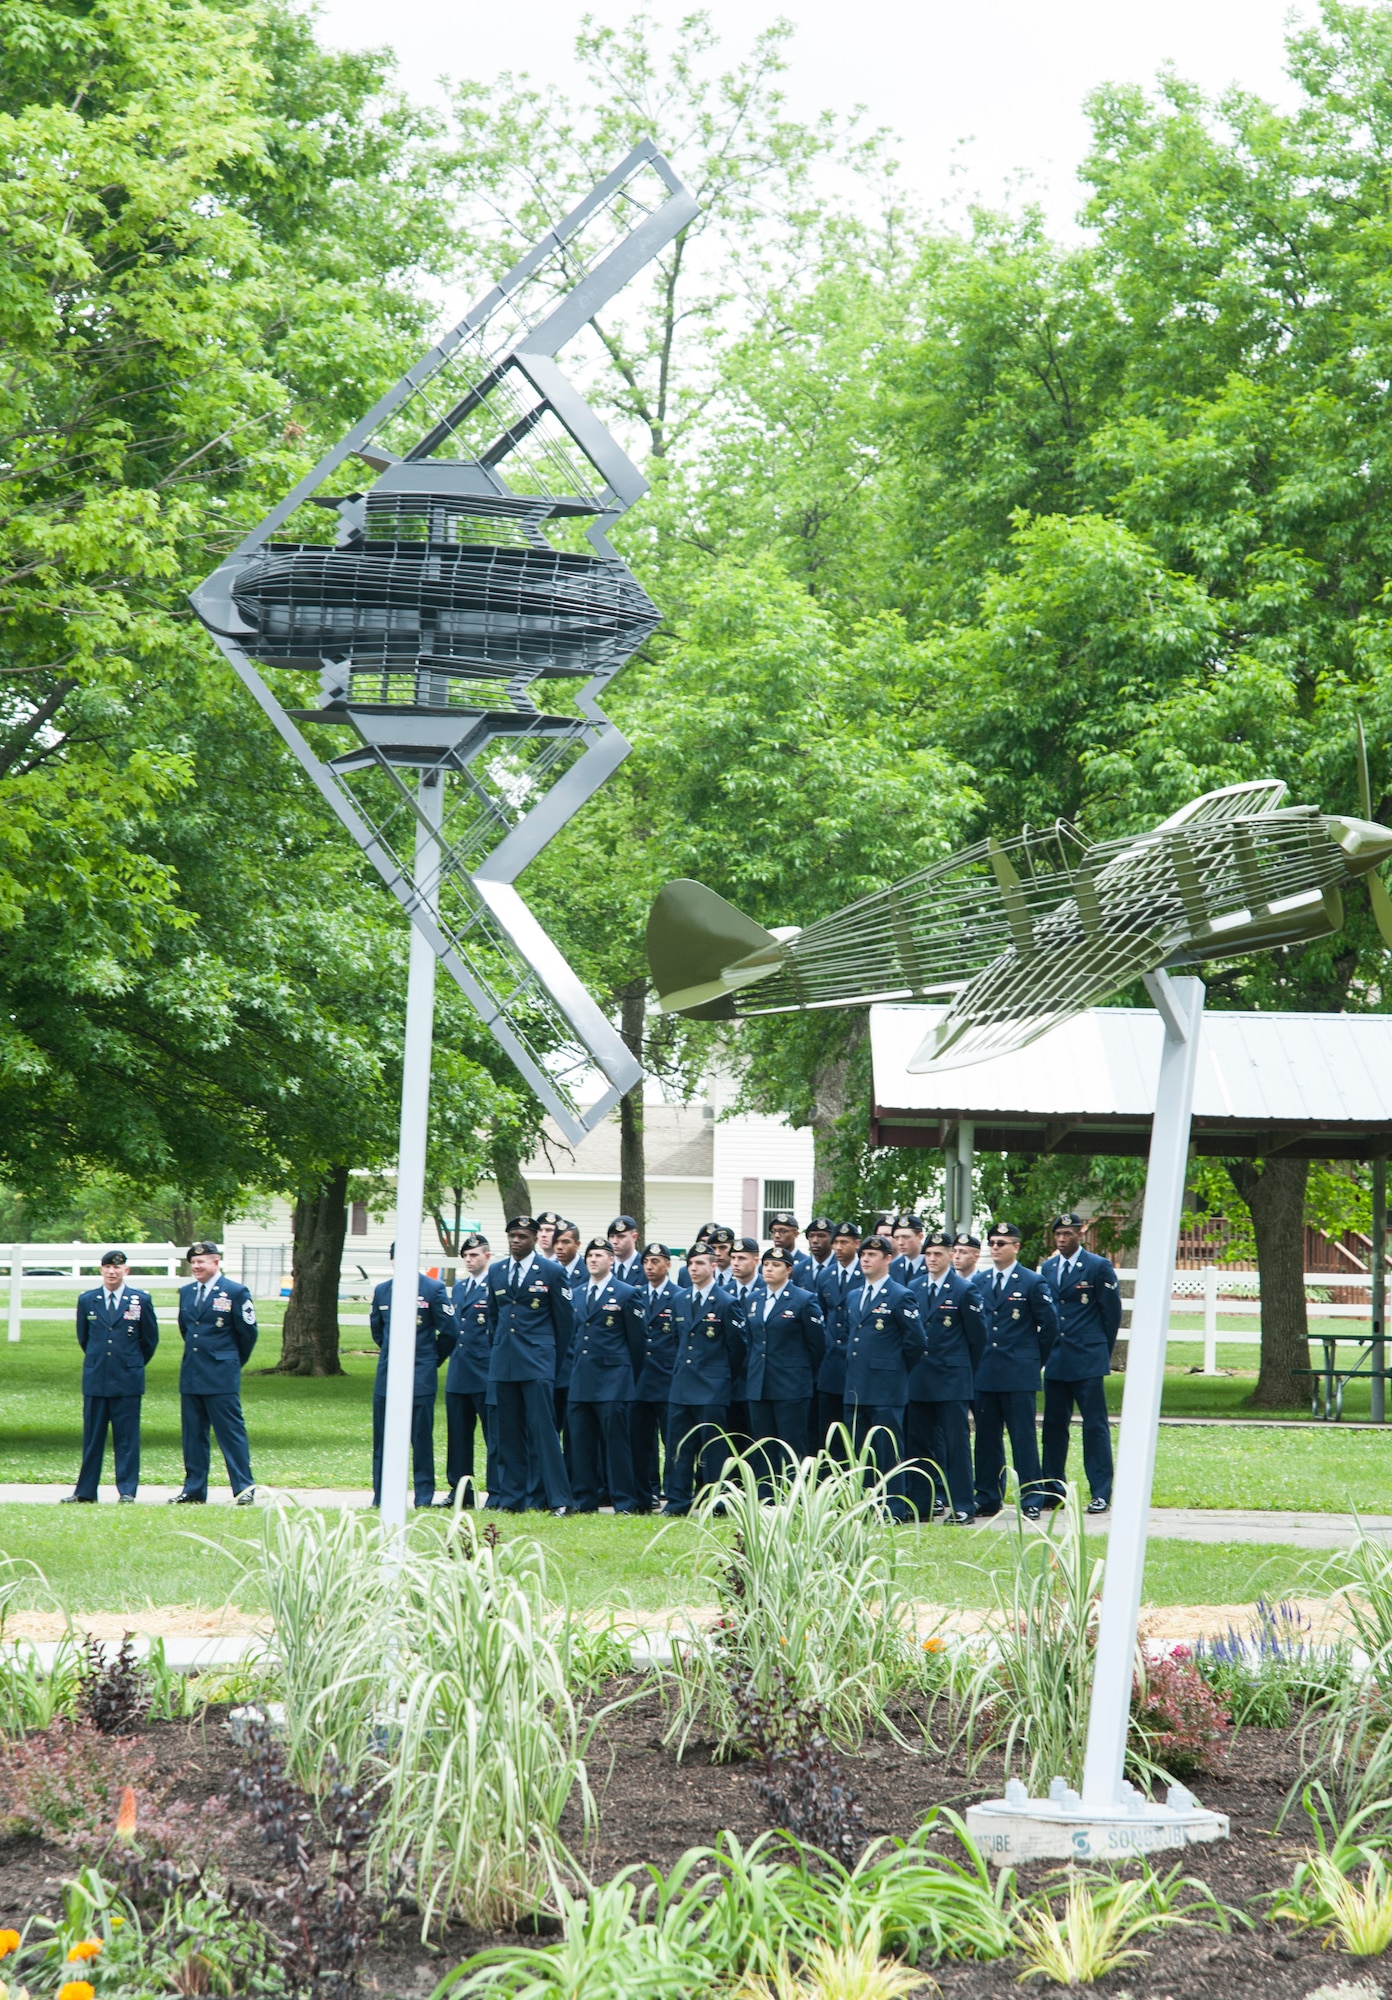 Airmen from the 509th Security Forces Squadron at Whiteman Air Force Base attend a ceremony for the opening of the Whiteman Corridor May 16, 2015, in Sedalia, Mo. The base was named after 2nd Lt. George Whiteman, a Sedalia native who was killed during World War II. The P-40B Warhawk points to lieutenant’s childhood home and represents the past, while the B-2 Spirit stealth bomber points toward the base and represents the future. (U.S. Air Force photo by Staff Sgt. Brigitte N. Brantley/Released)